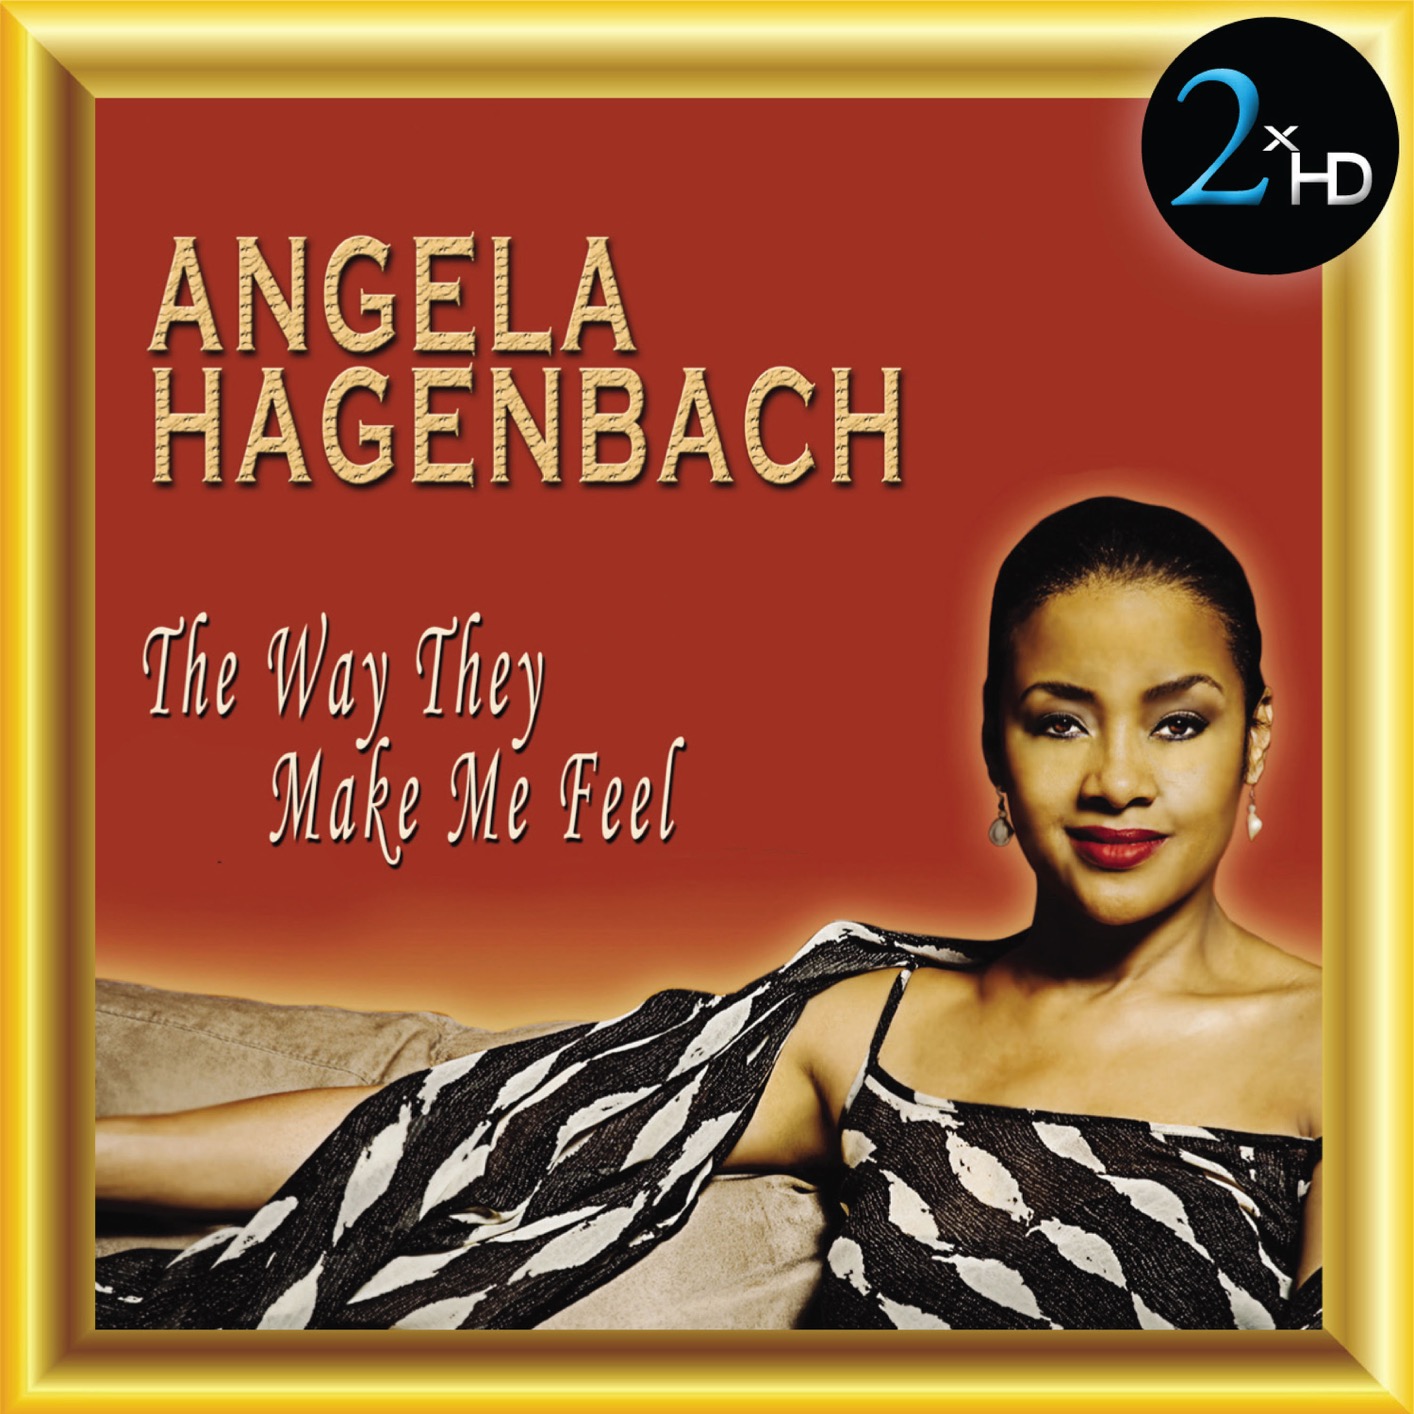 Angela Hagenbach – The Way They Make Me Feel (Remastered) (2017) [FLAC 24bit/44,1kHz]